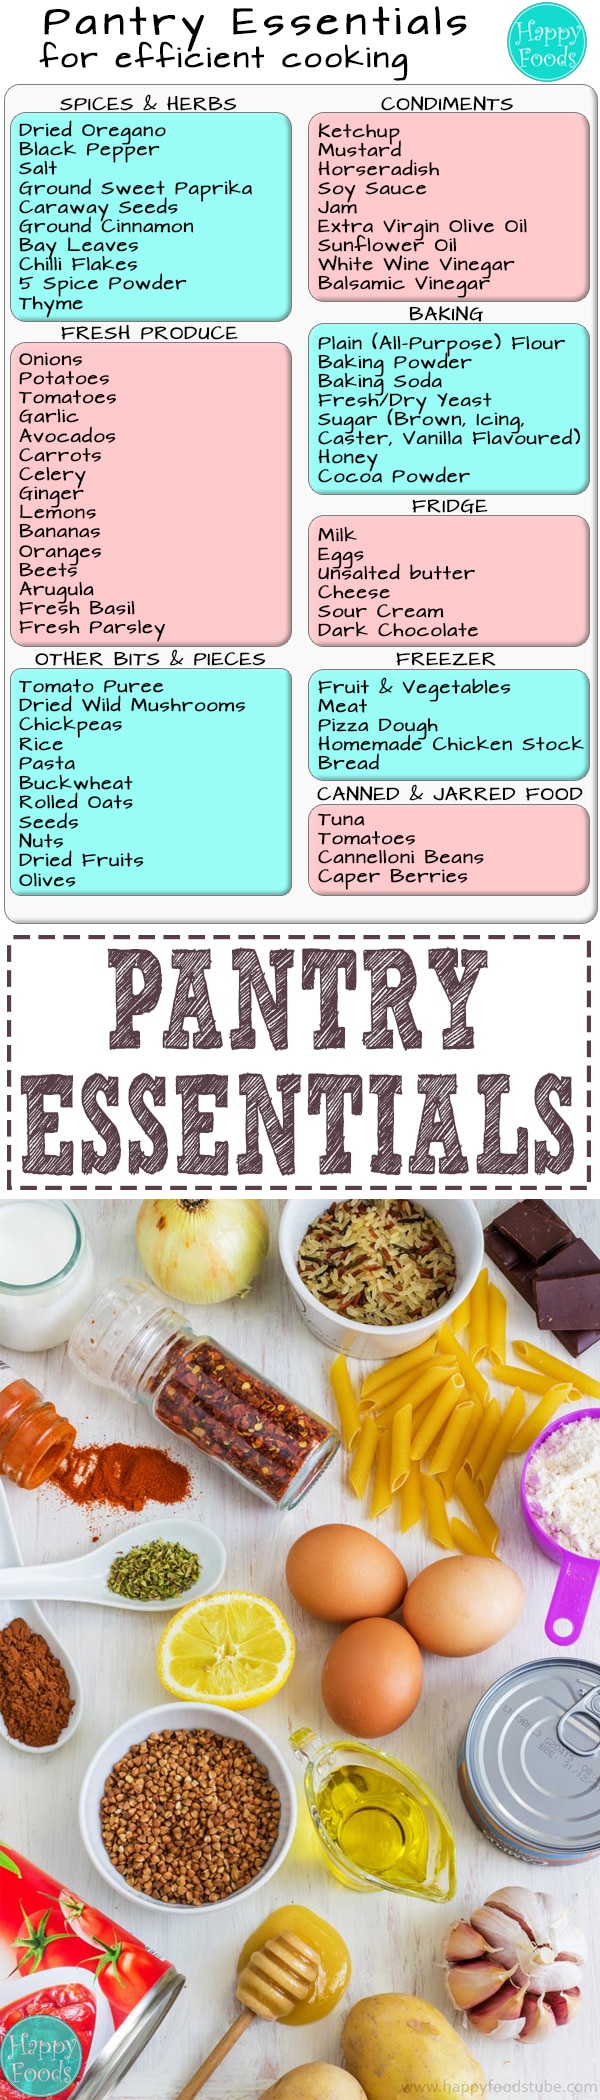 20 Pantry Essentials That Make Cooking Easier, Fustini's Oils and Vinegars